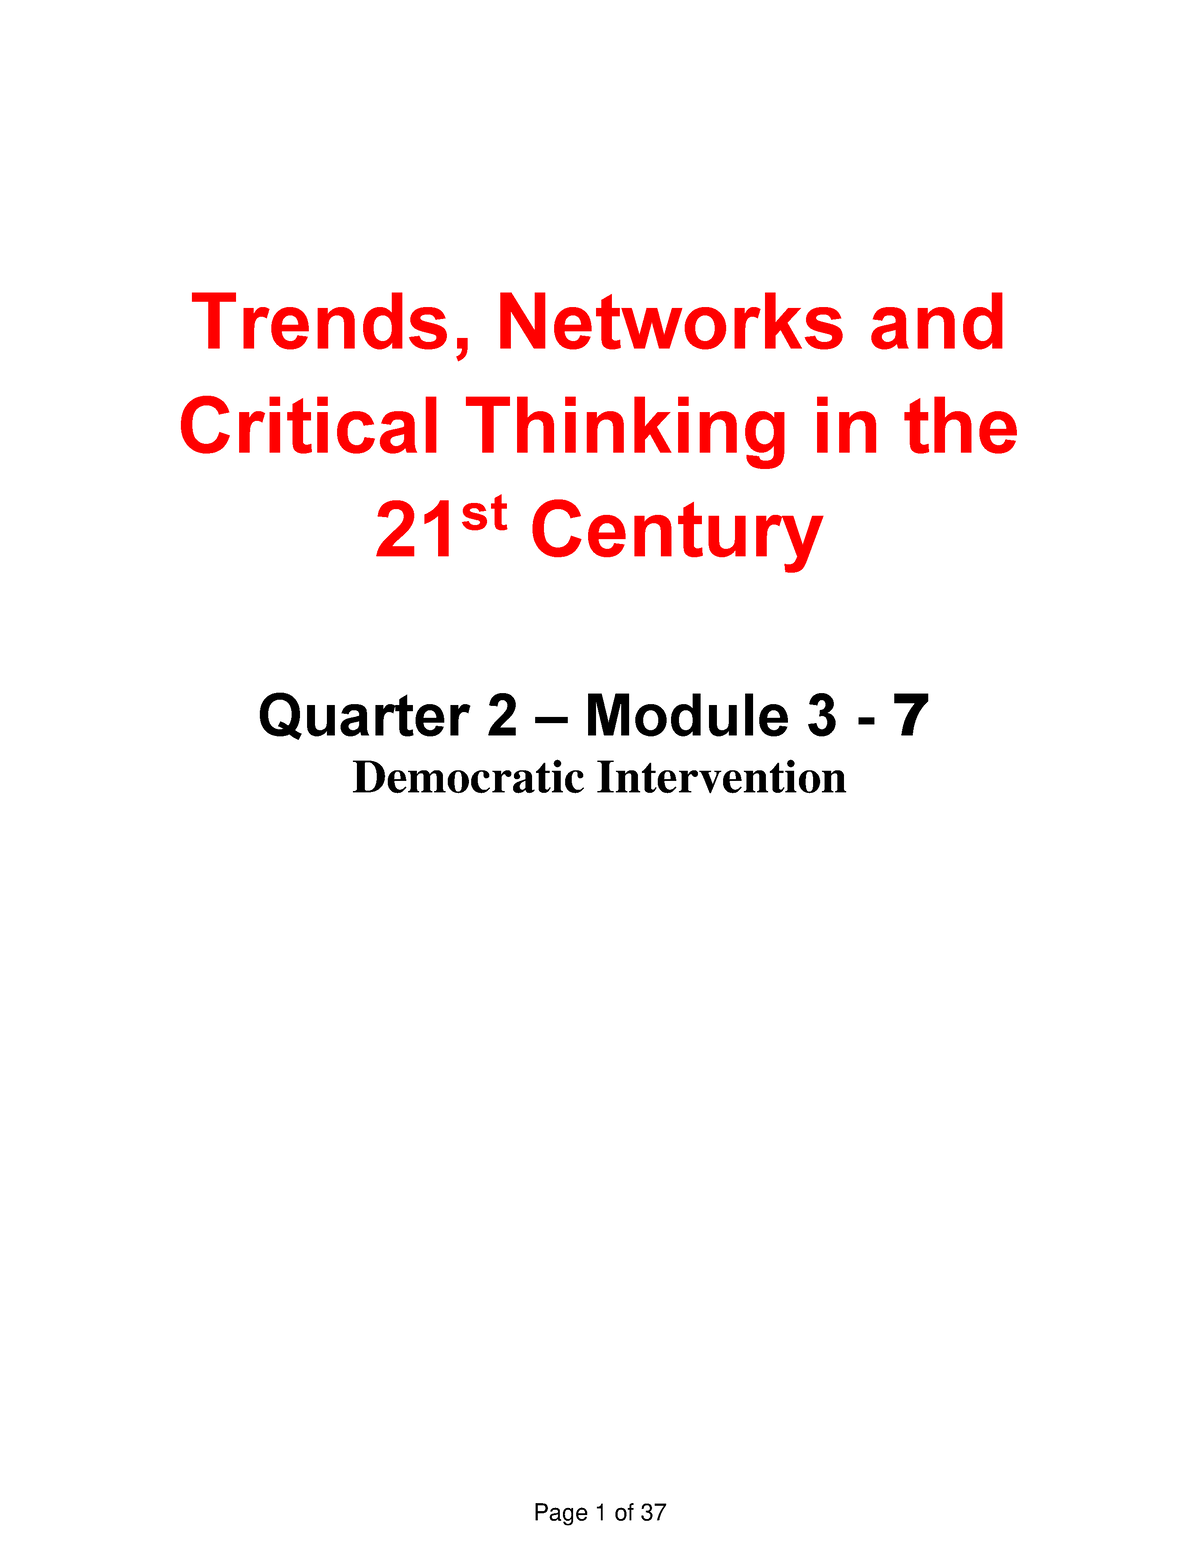 trends networks and critical thinking quarter 2 module 1 pdf